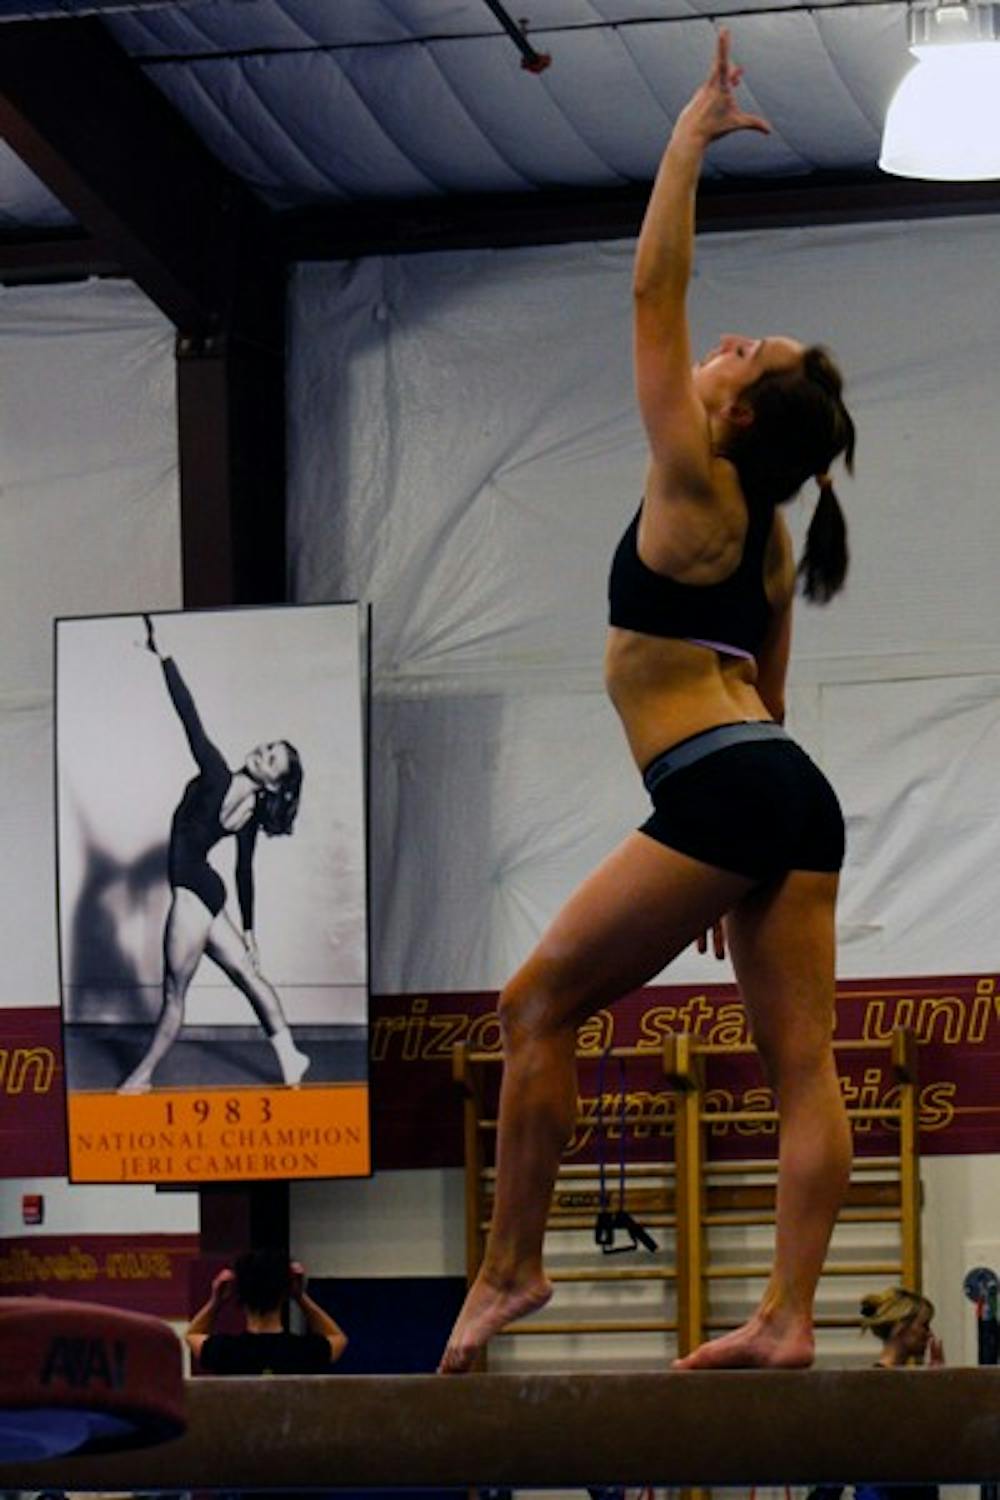 Practice form: ASU freshman Samantha Seaman works on her beam routine during practice on Feb. 1. The Gym Devils are looking for their second consecutive Pac-10 dual victory. (Photo by Lisa Bartoli)